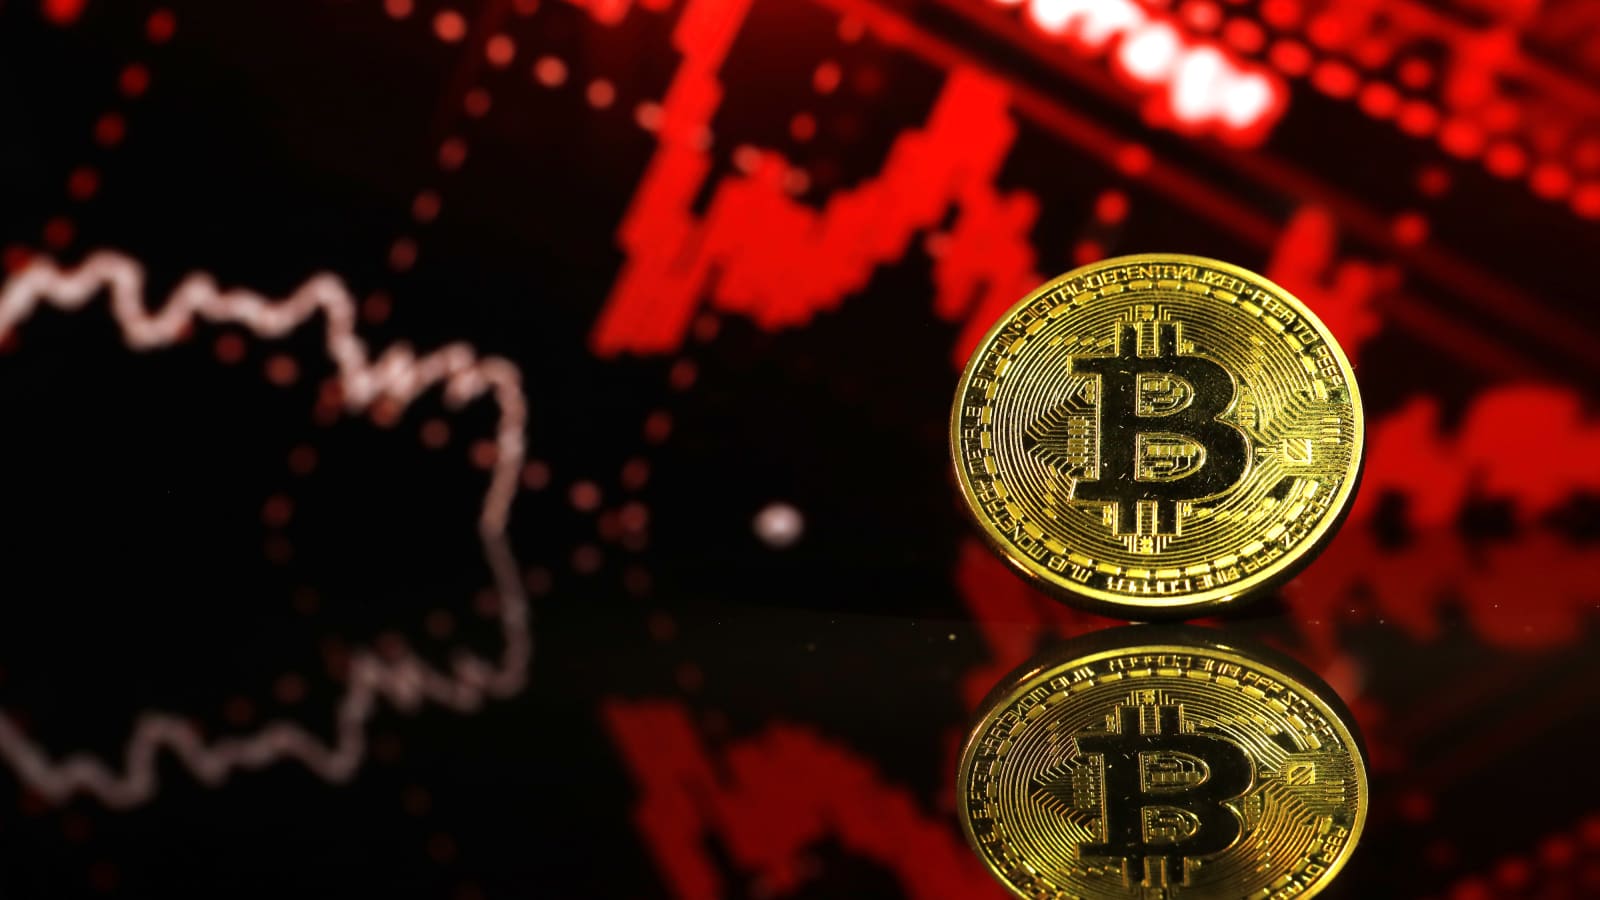 Bitcoin (BTC) price plunges to $30,000, hits lowest level since January 